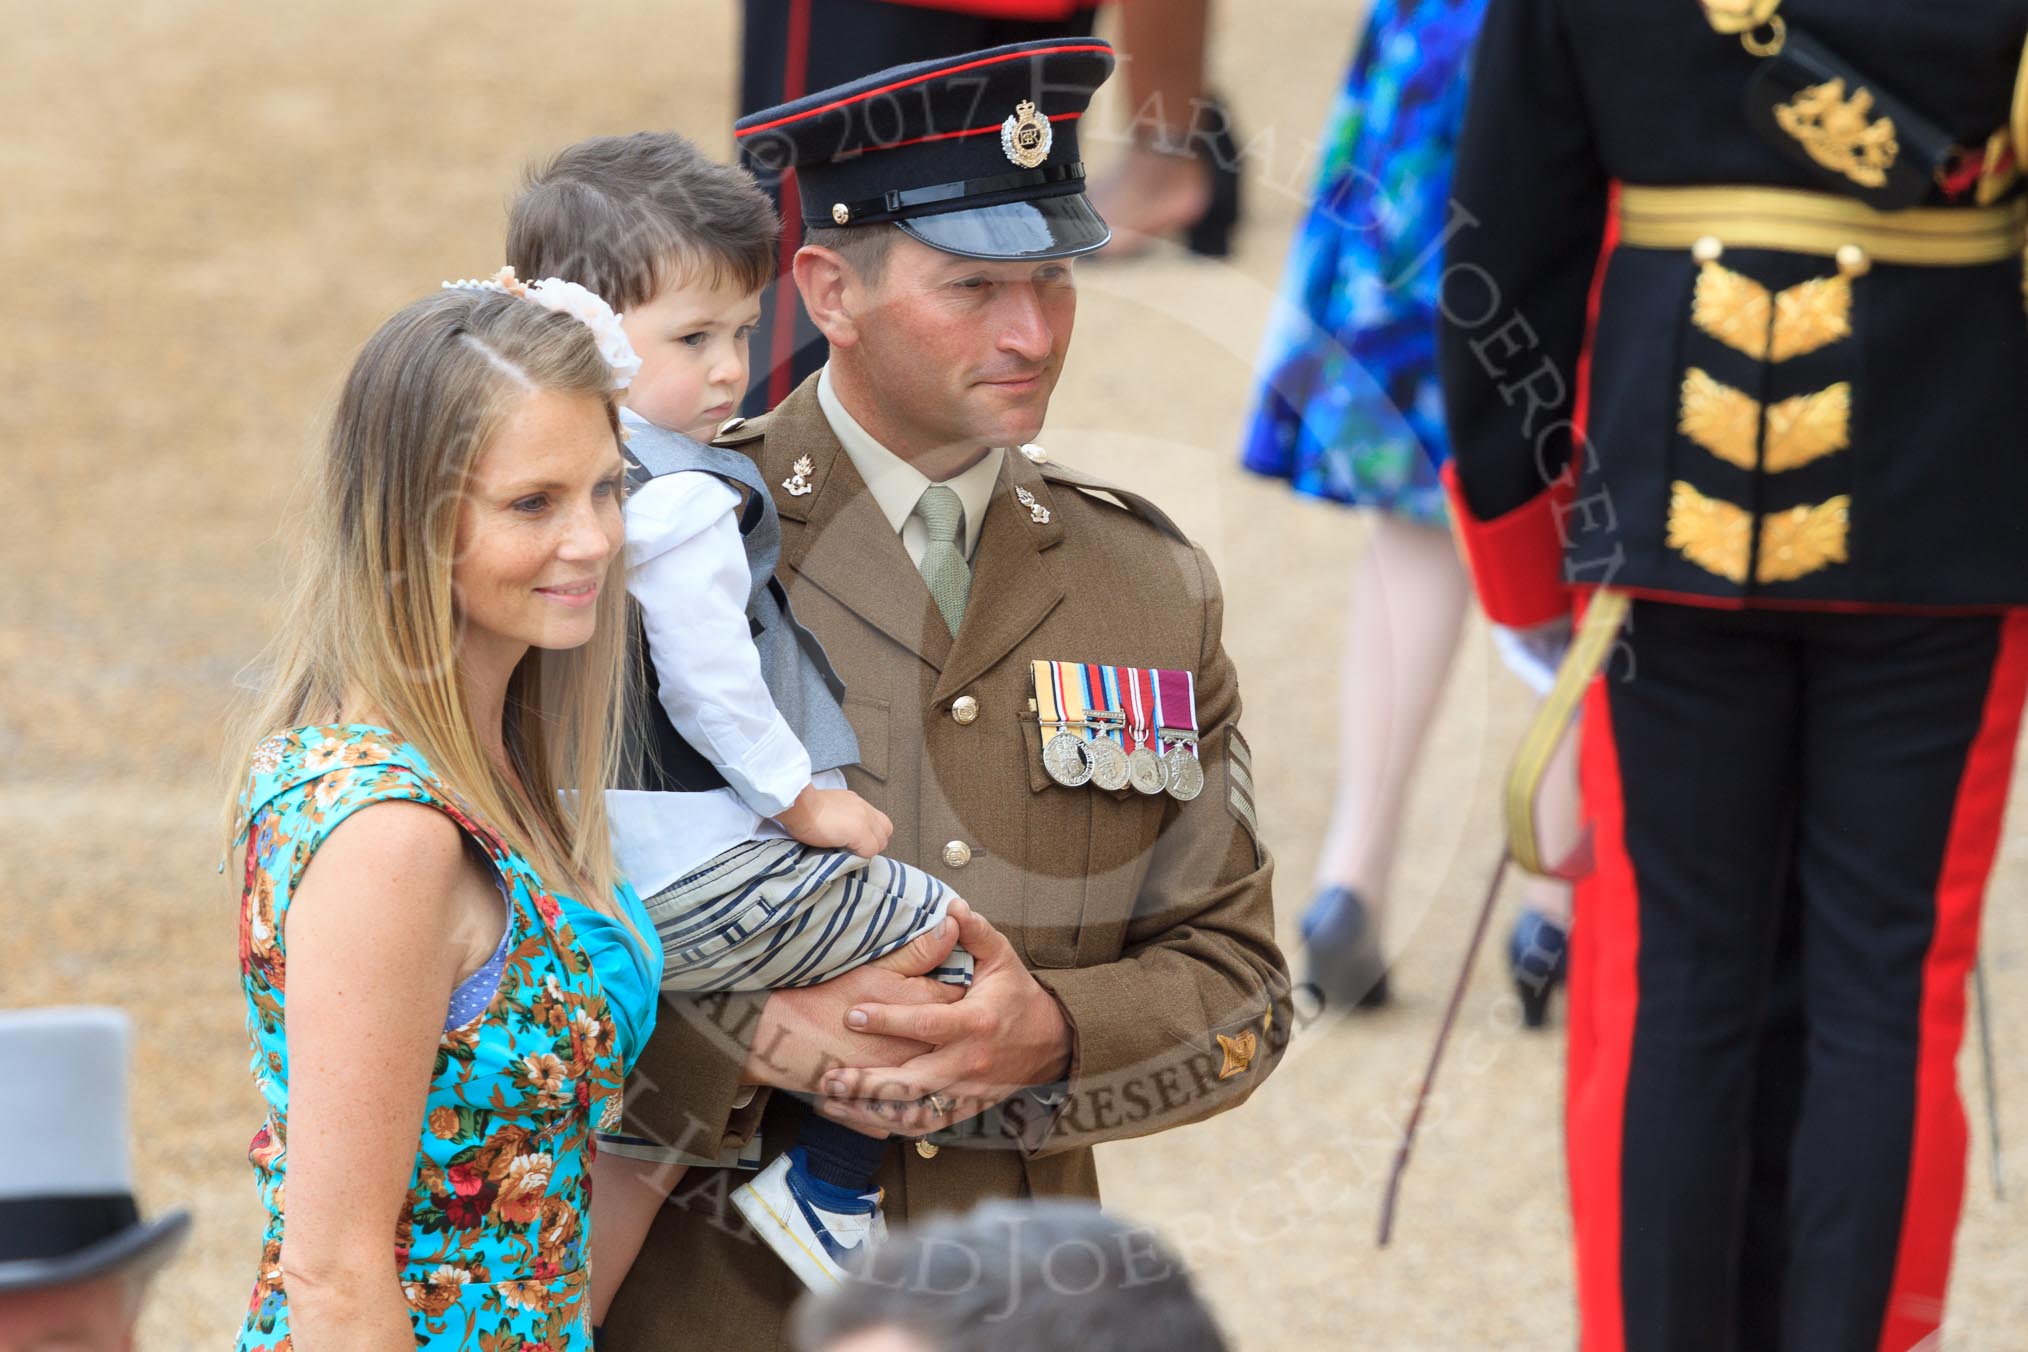 Army officer with wife and son before Trooping the Colour 2018, The Queen's Birthday Parade at Horse Guards Parade, Westminster, London, 9 June 2018, 09:19.